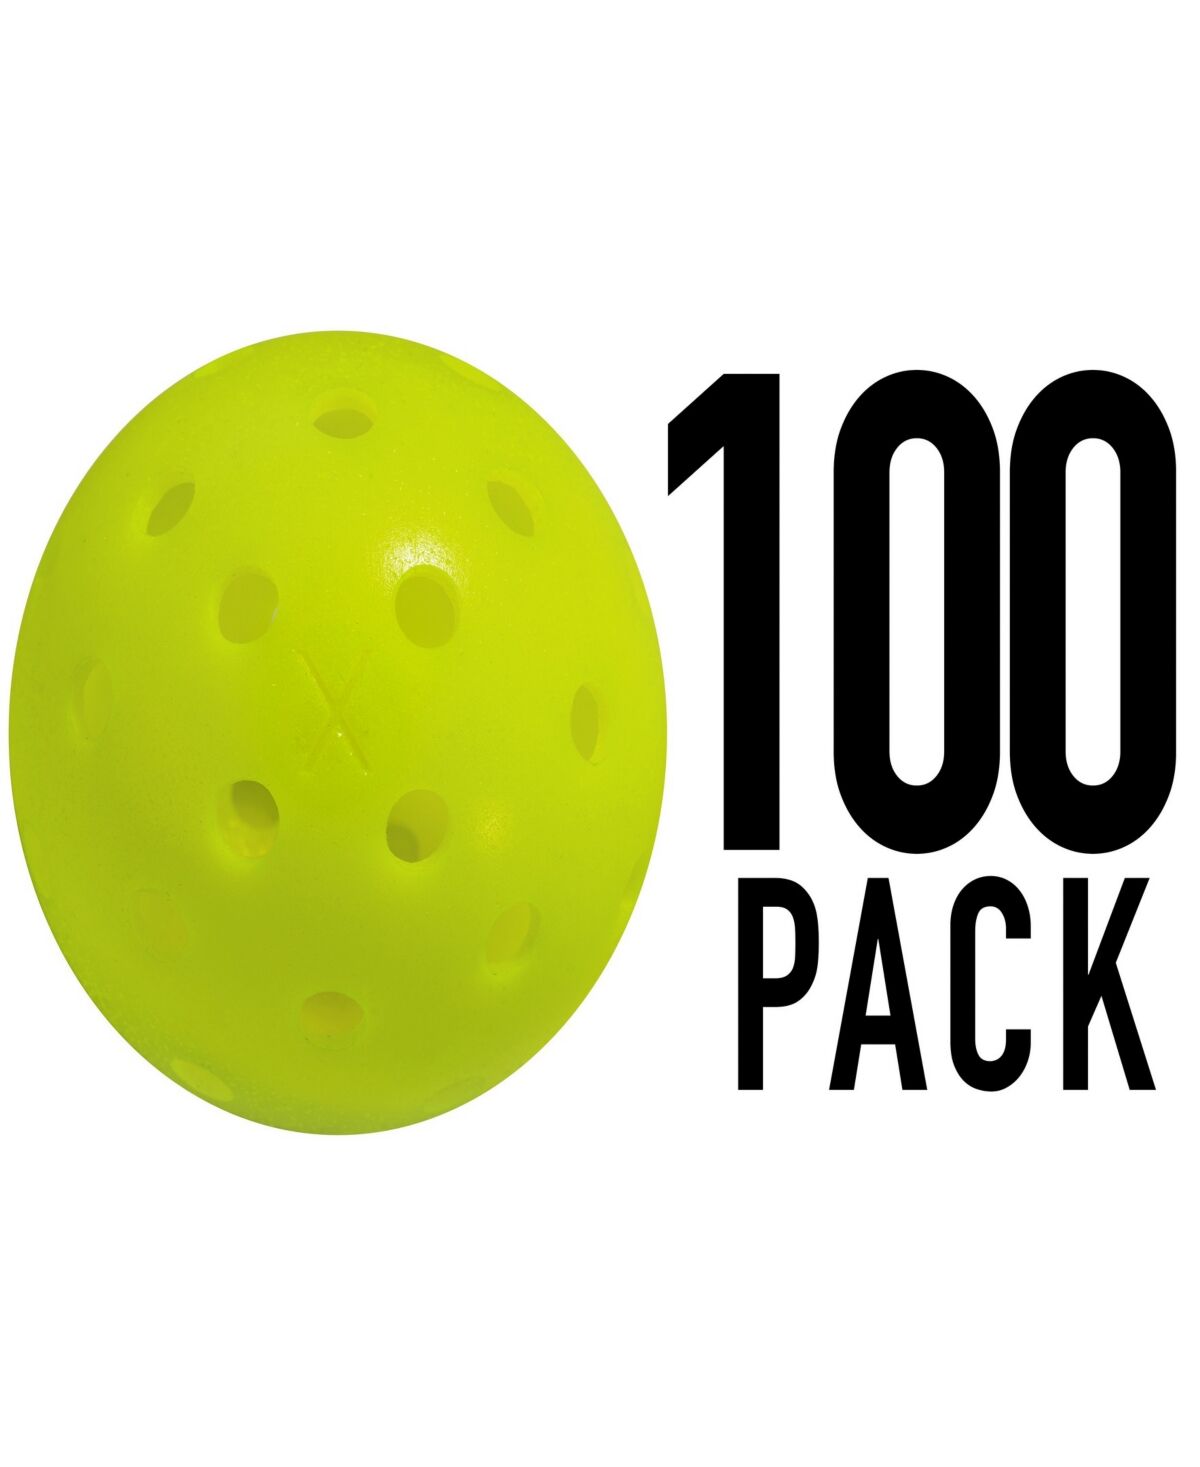 Franklin Sports X-40 Performance Outdoor Pickleballs - United Stes - Uspa Approved (100 Pack) - Yellow